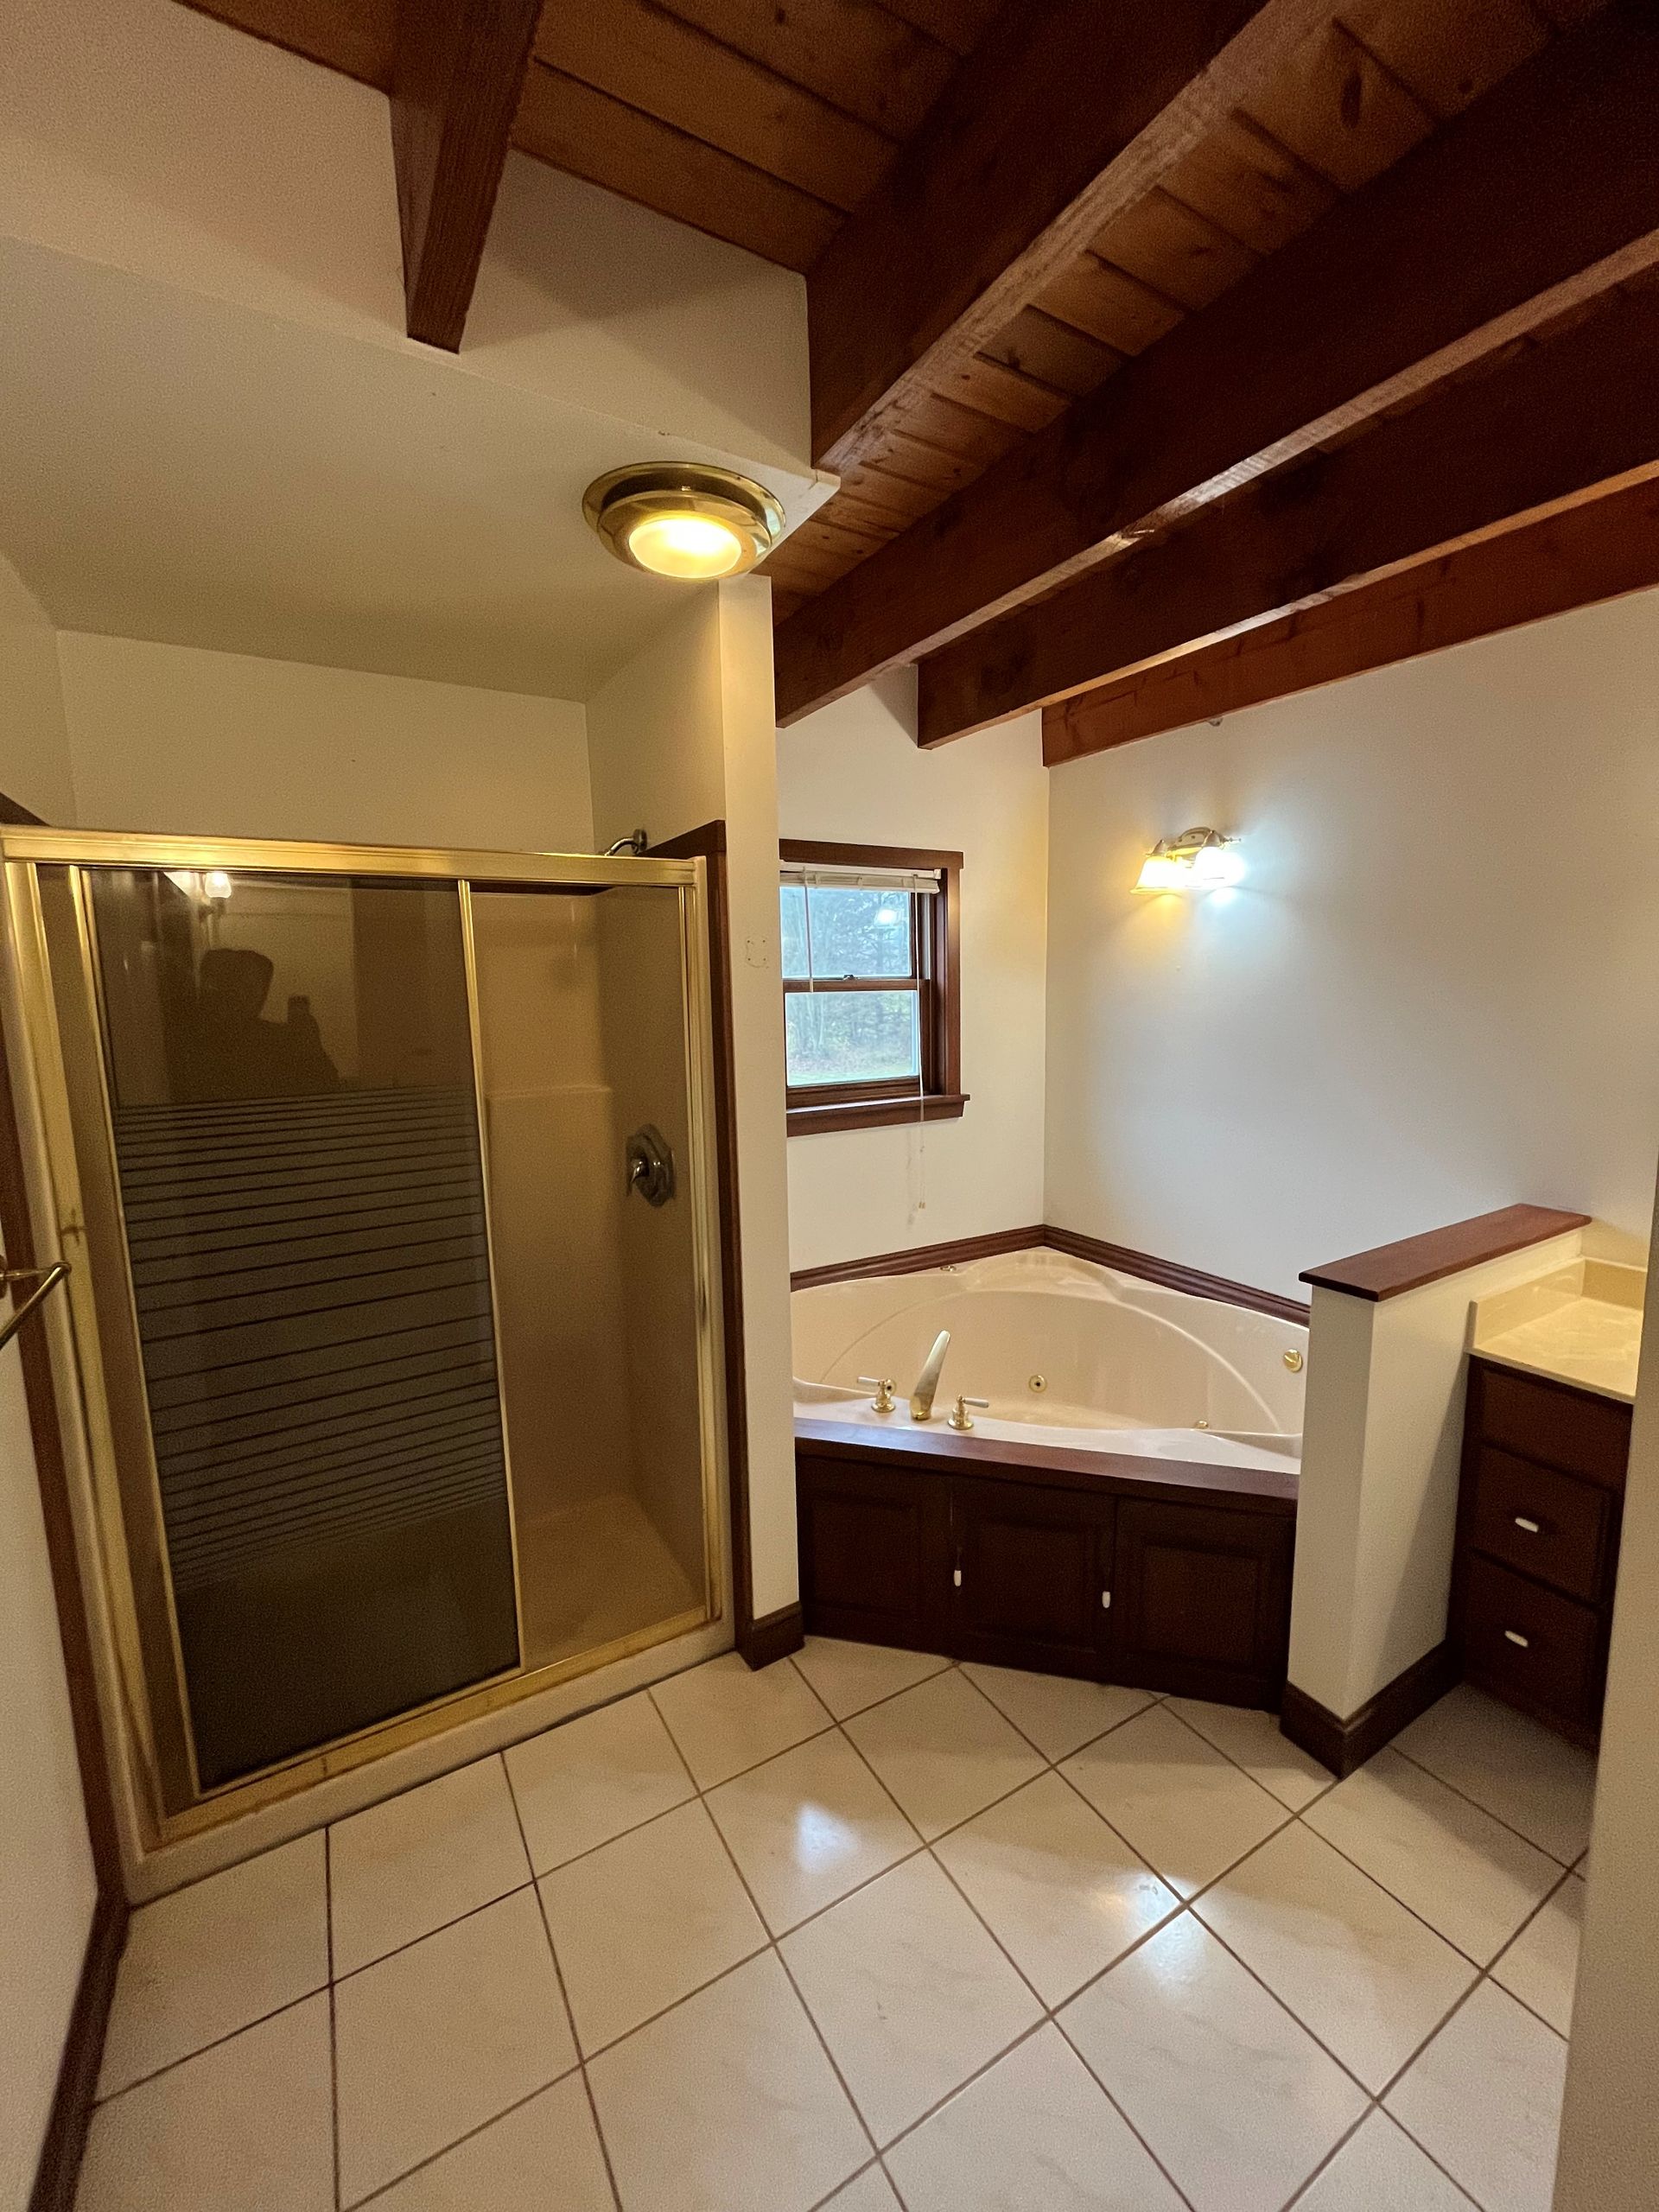 a bathroom with a jacuzzi tub and a walk in shower